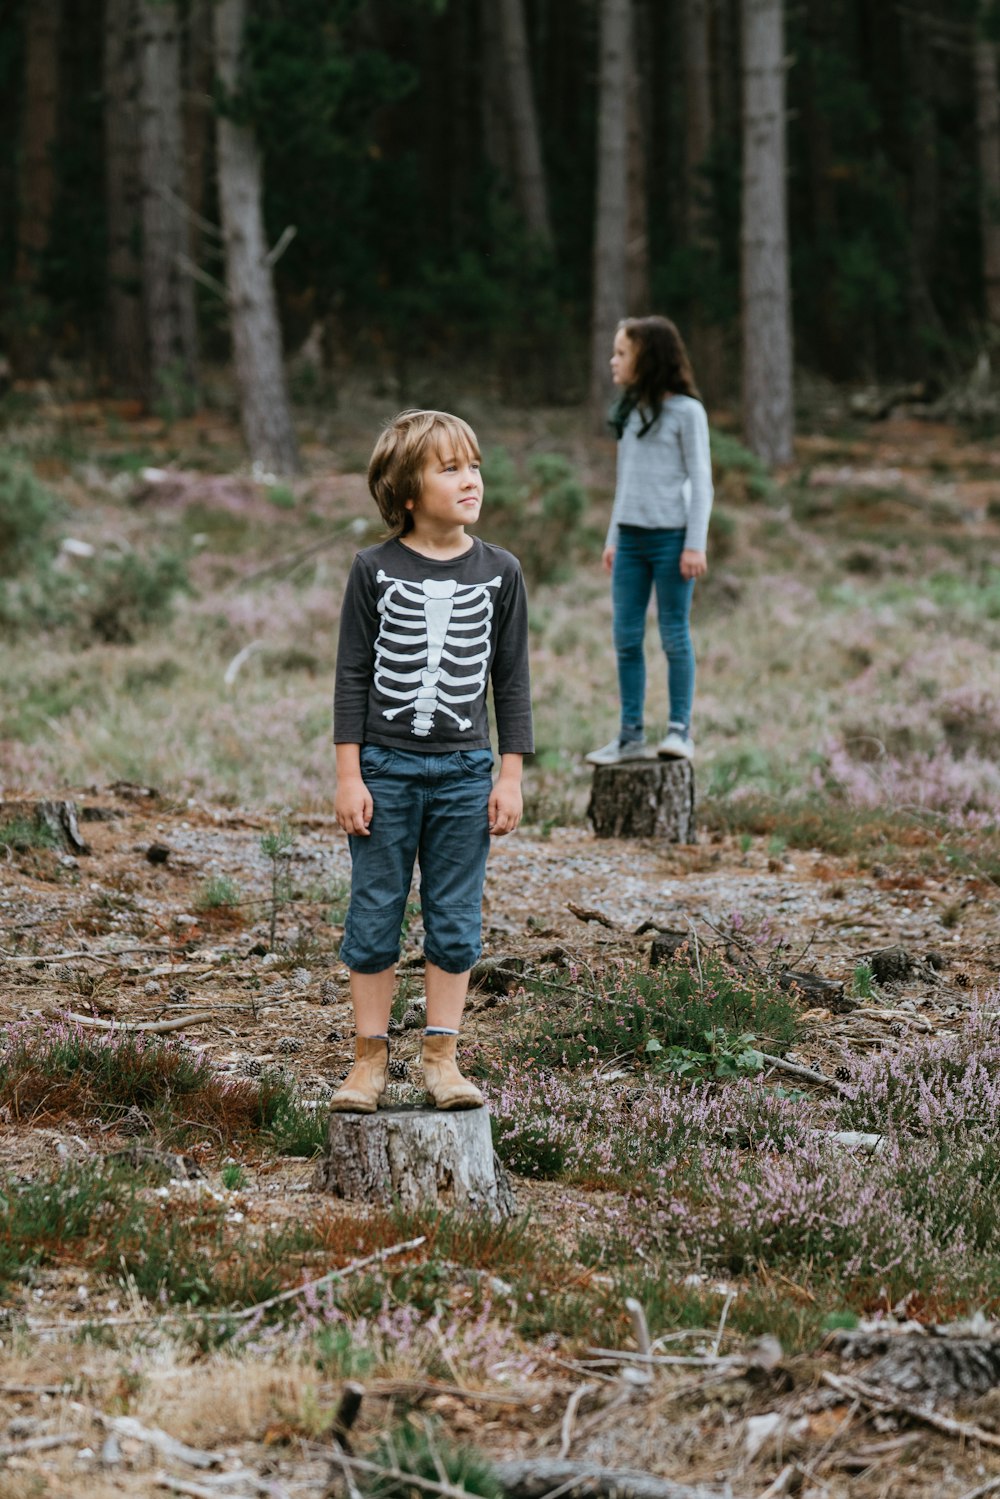 boy standing on chopped log in middle of forest during daytime